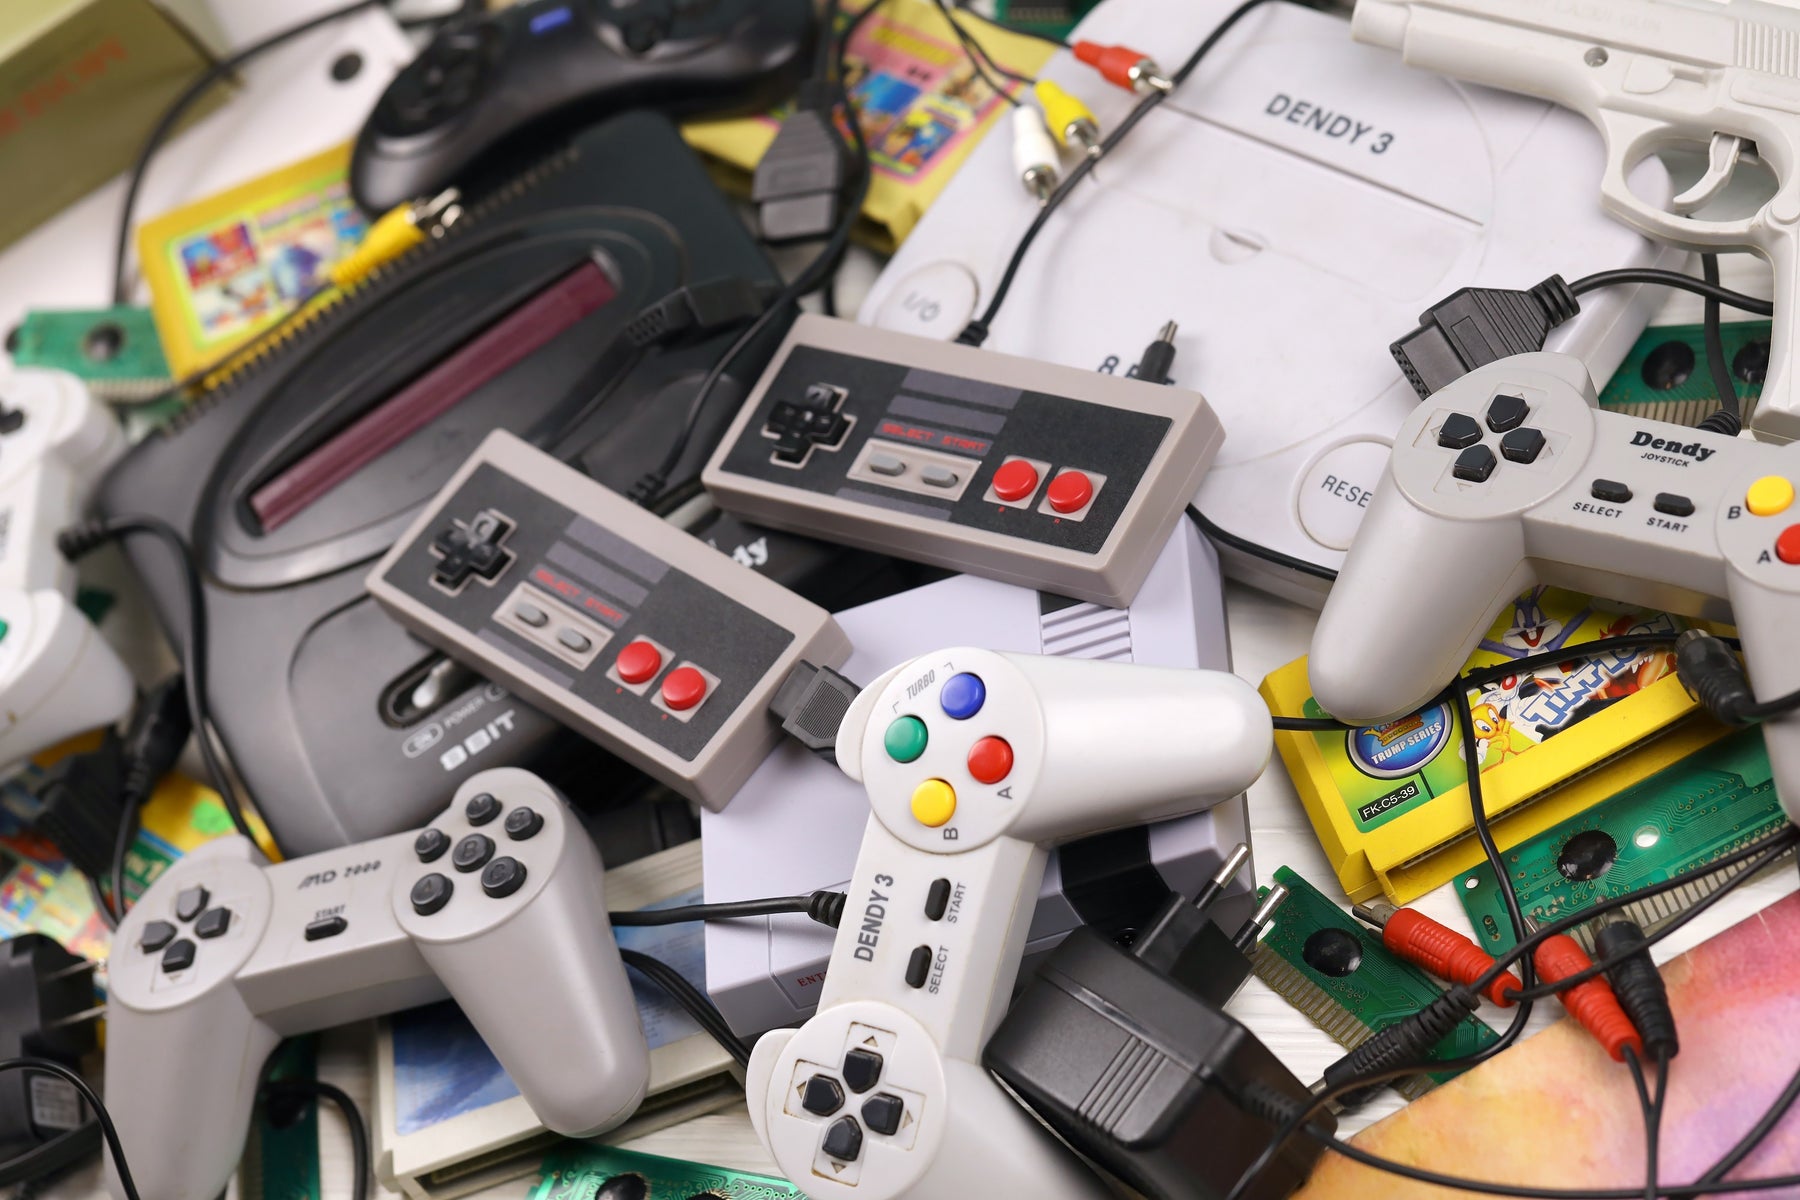 Retro and vintage video game consoles and video games